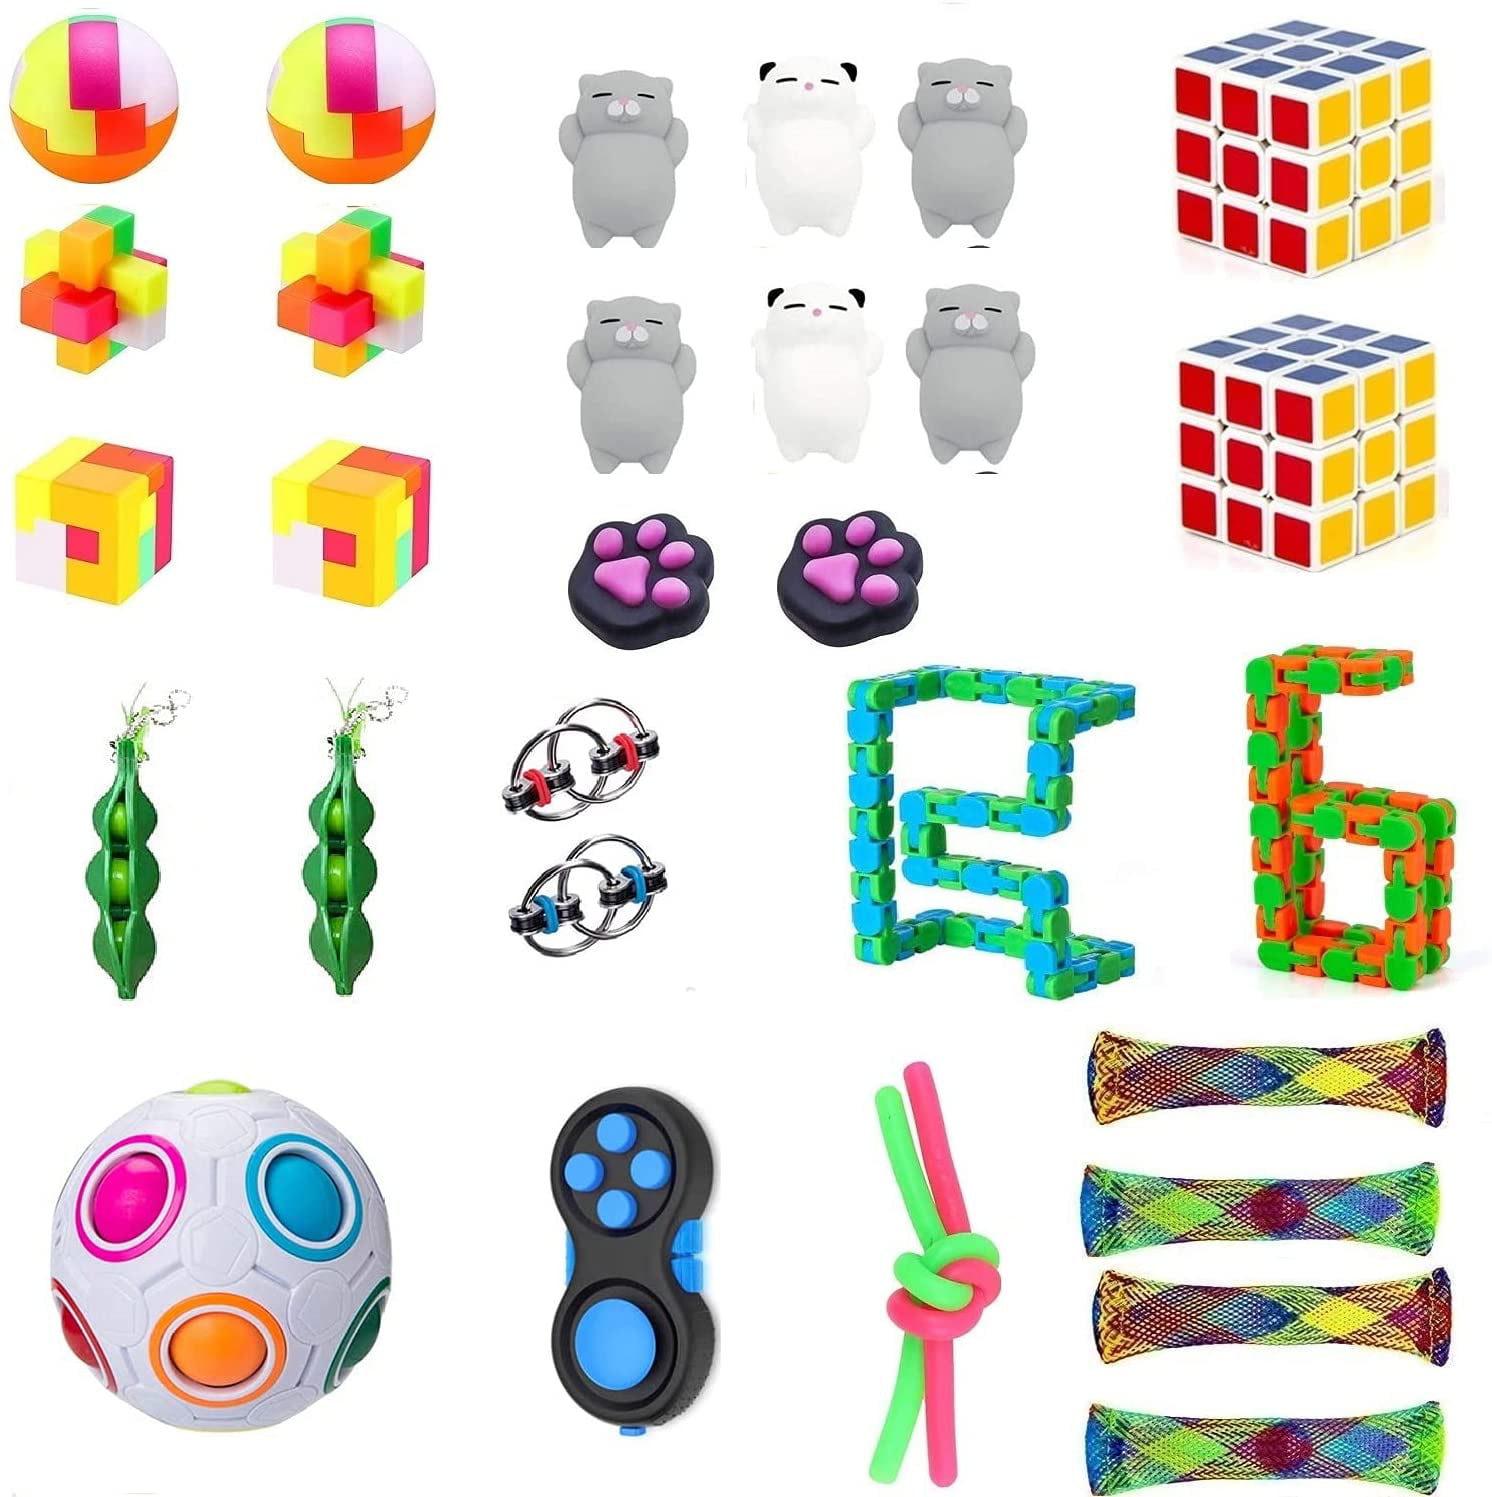 Details about   32 Pack Bundle Sensory Fidget Toys Set Stress Relief AND Anti-Anxiety Tools NEW 